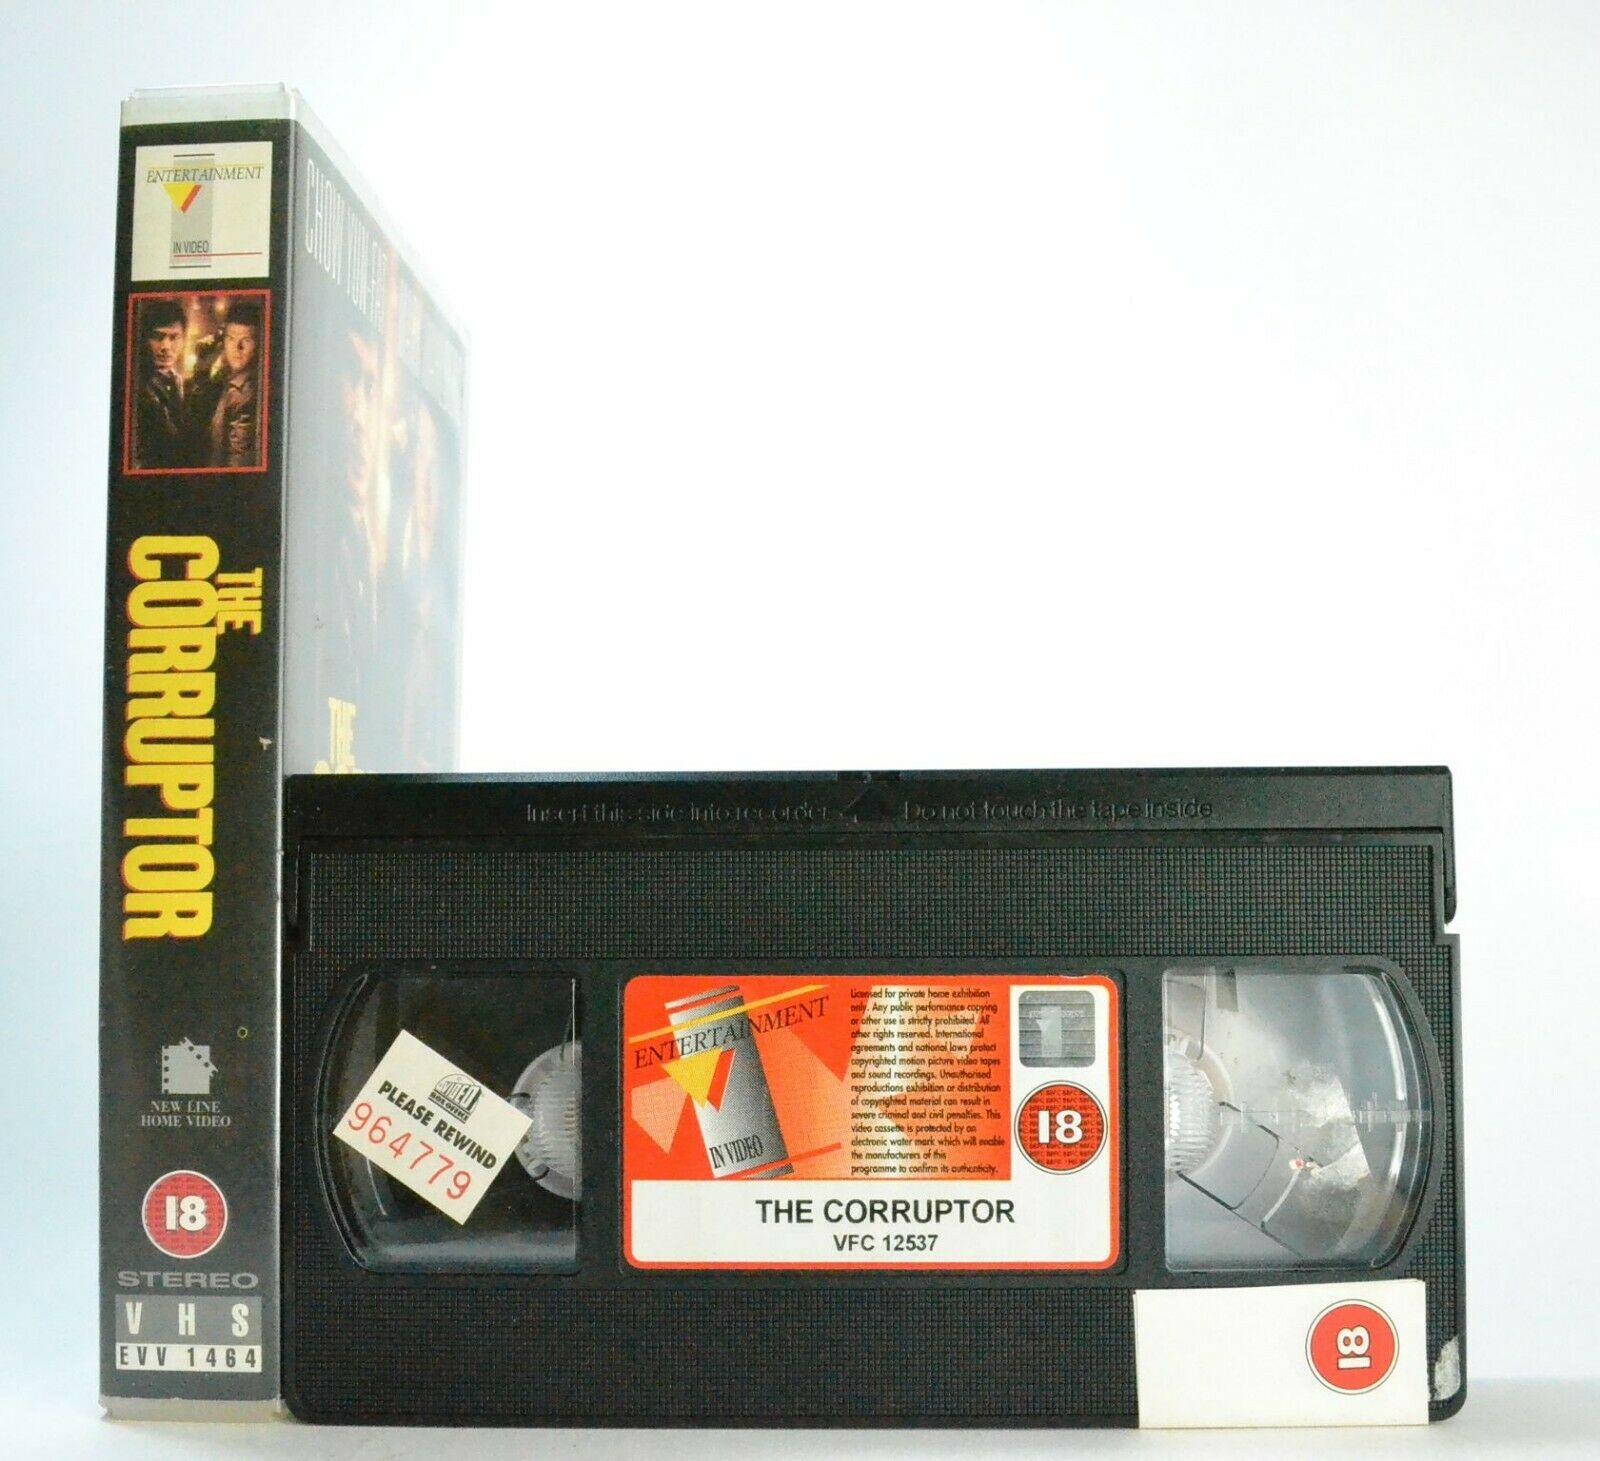 The Corruptor: Film By J.Foley - Large Box - Action/Adventure - M.Wahlberg - VHS-